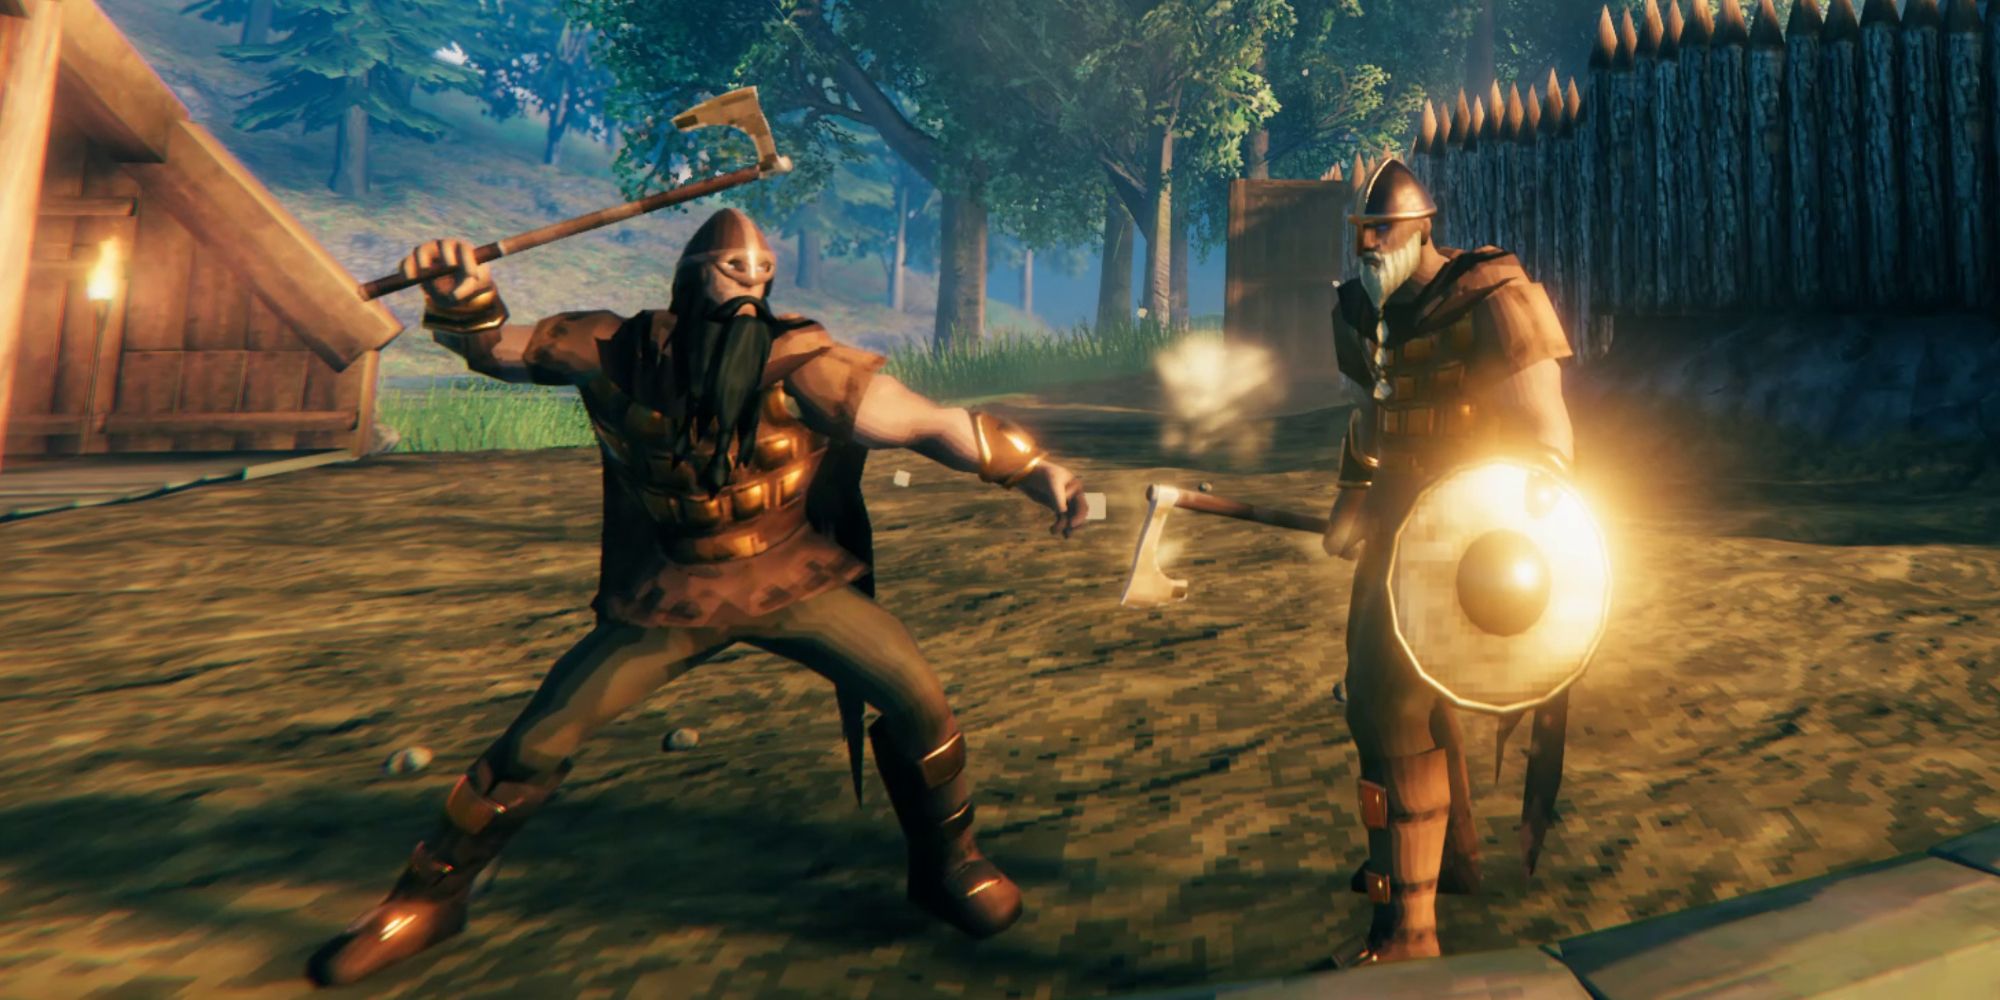 A player swinging an ax at another player in Valheim